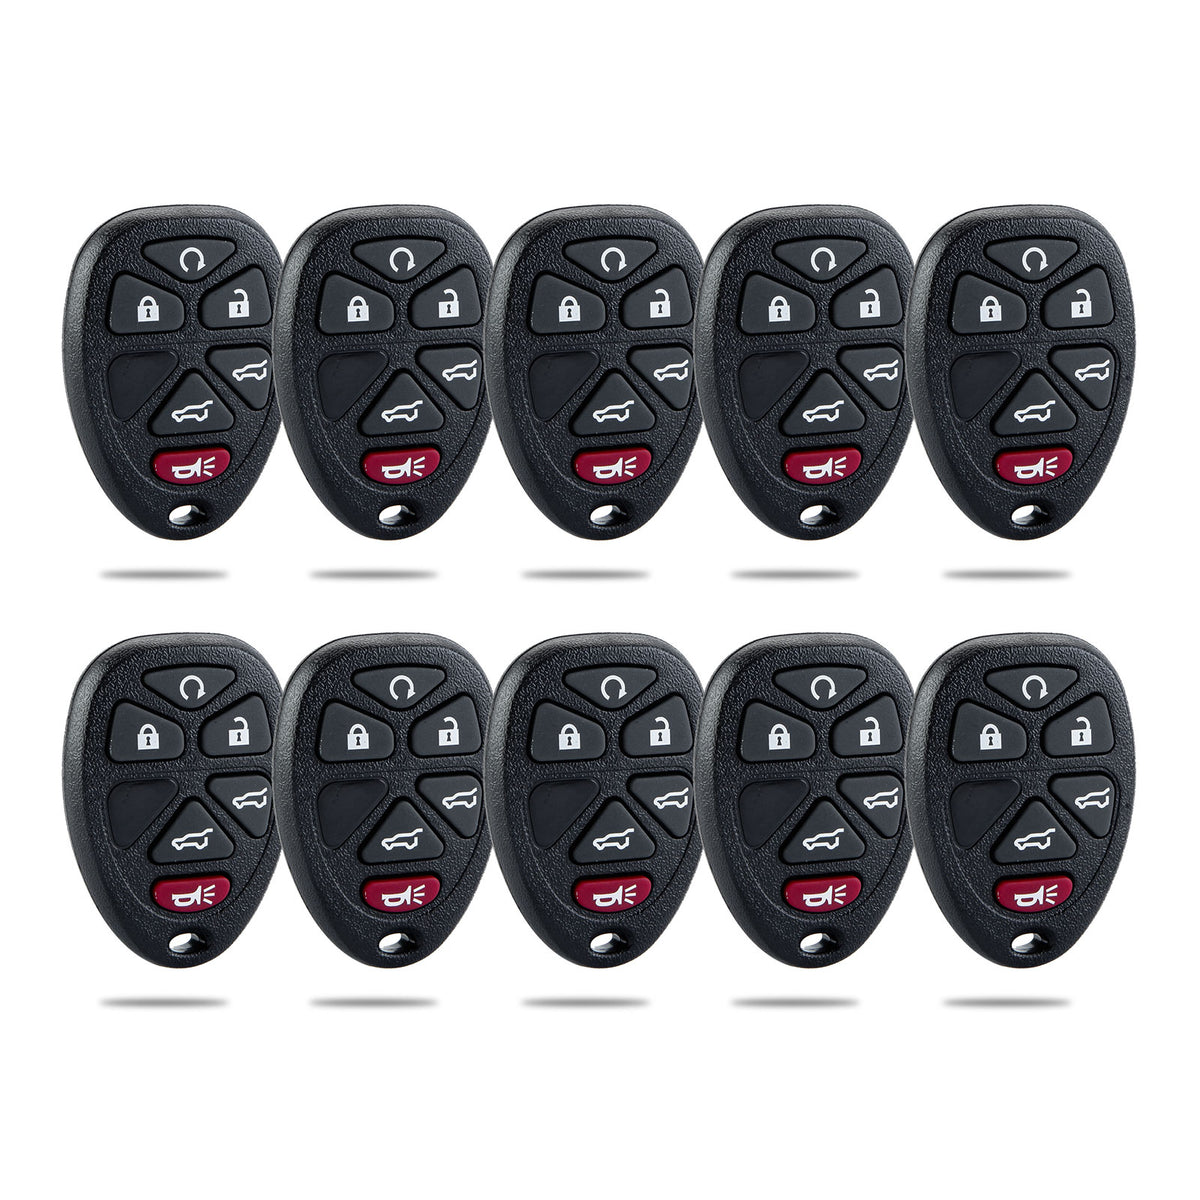 Lots of 10 Car Remote Fob Replacement for OUC60270 15913427 fits 2007 2008 2009 2010 2011 2012 2013 2014 Chevy Tahoe Suburban